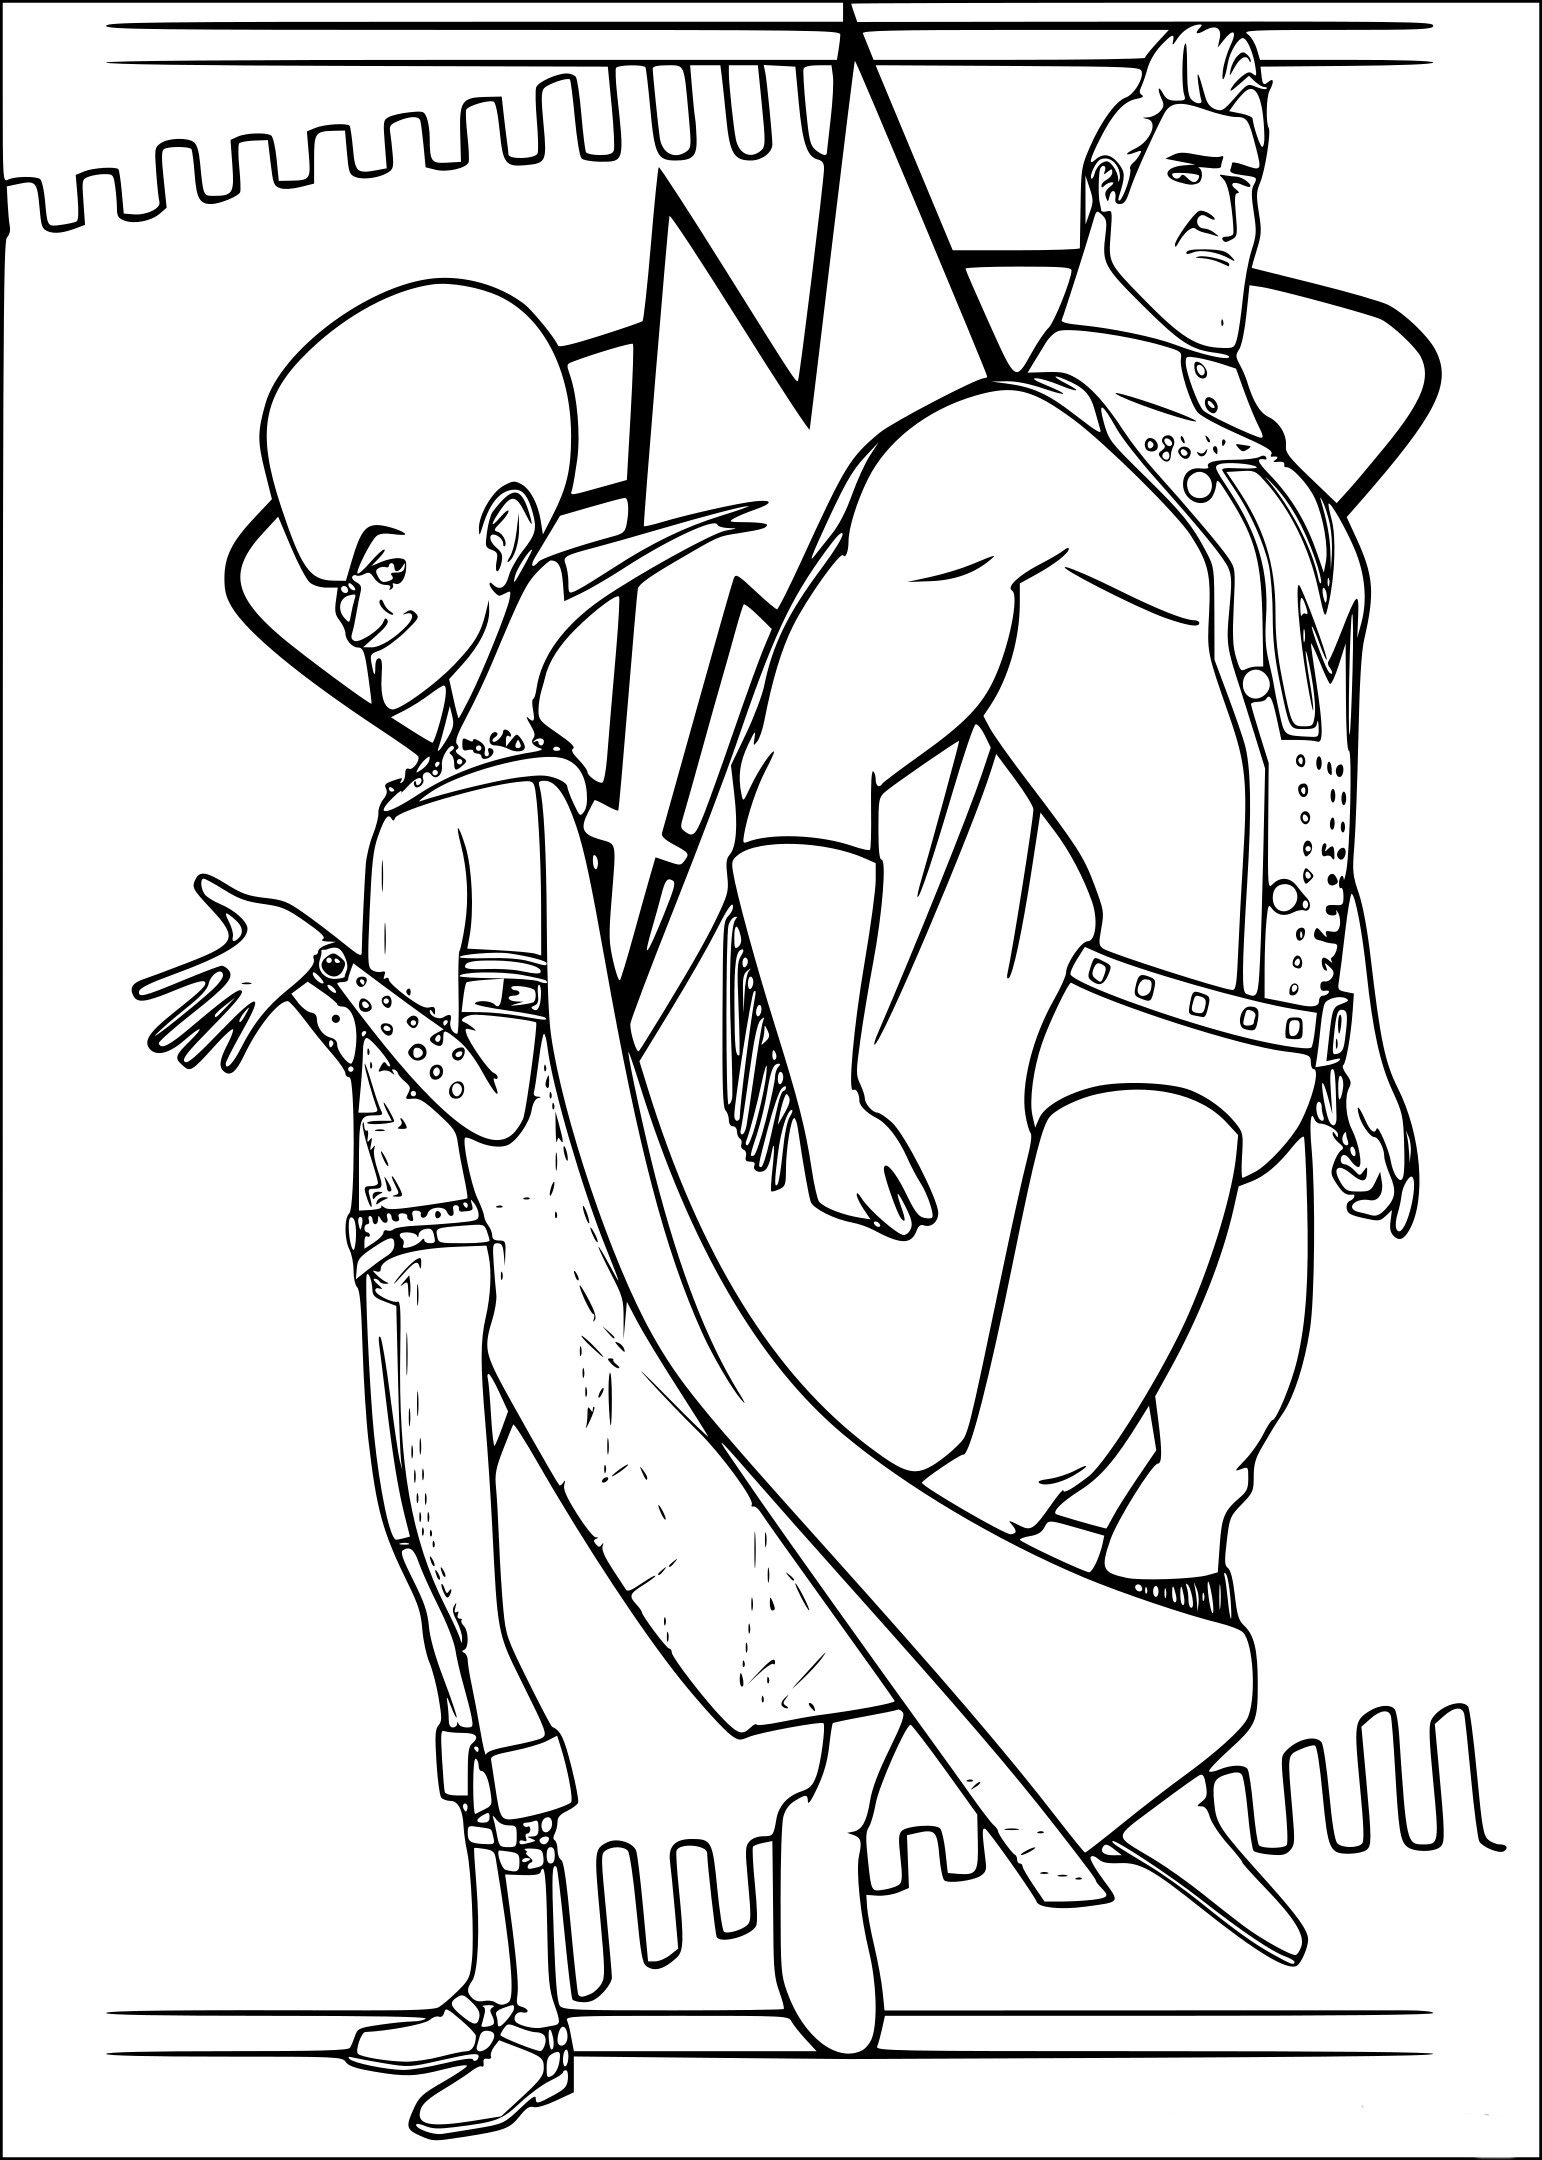 Megamind coloring page - free printable coloring pages on coloori.com